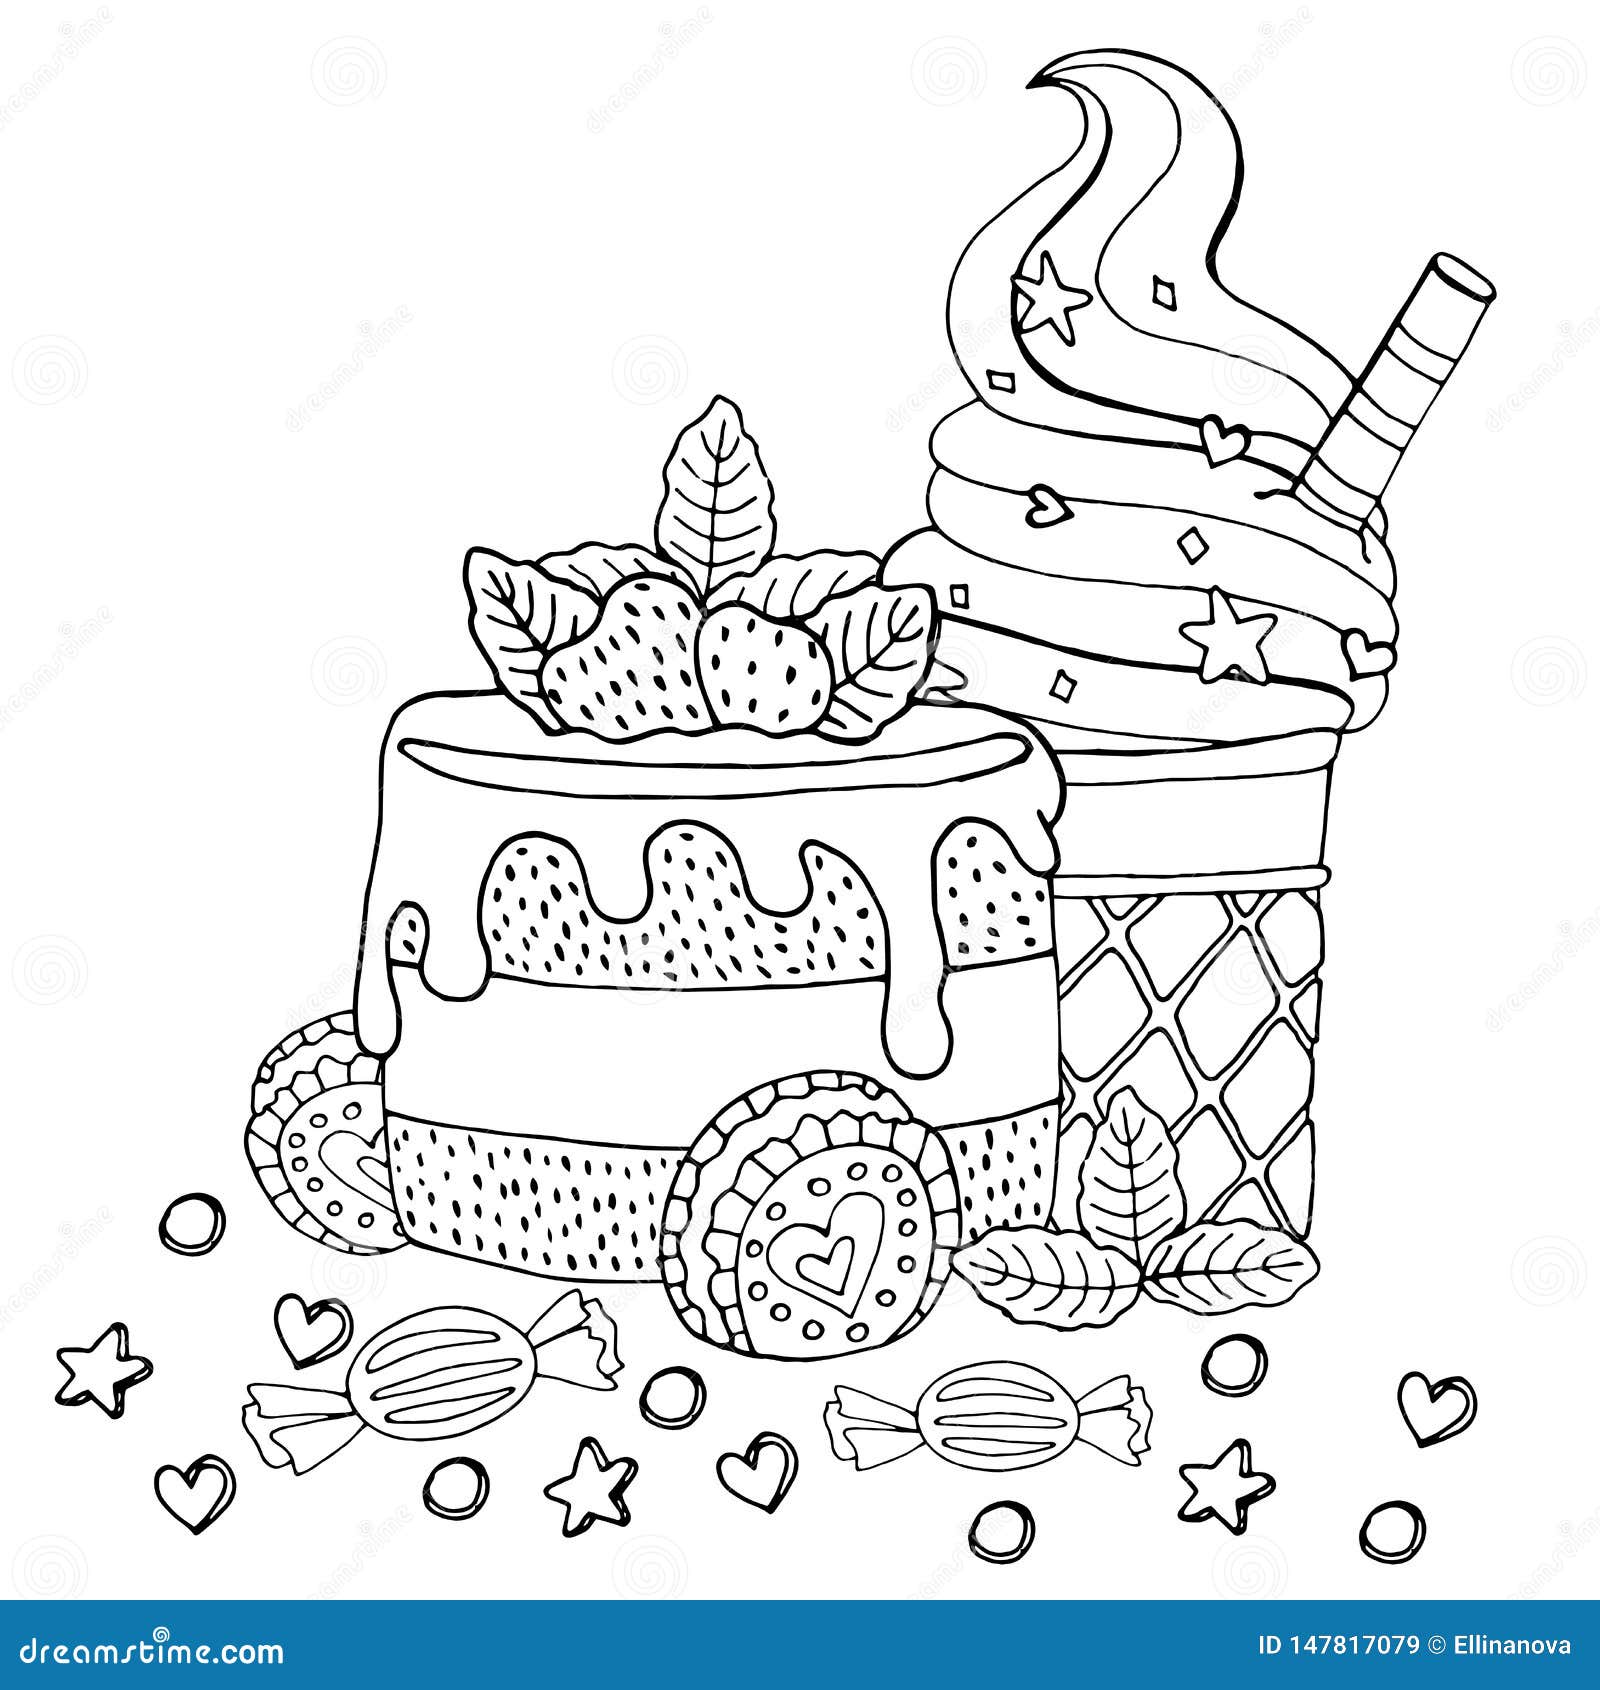 Coloring Page with Cake, Cupcake, Candy, Ice Cream and Other ...